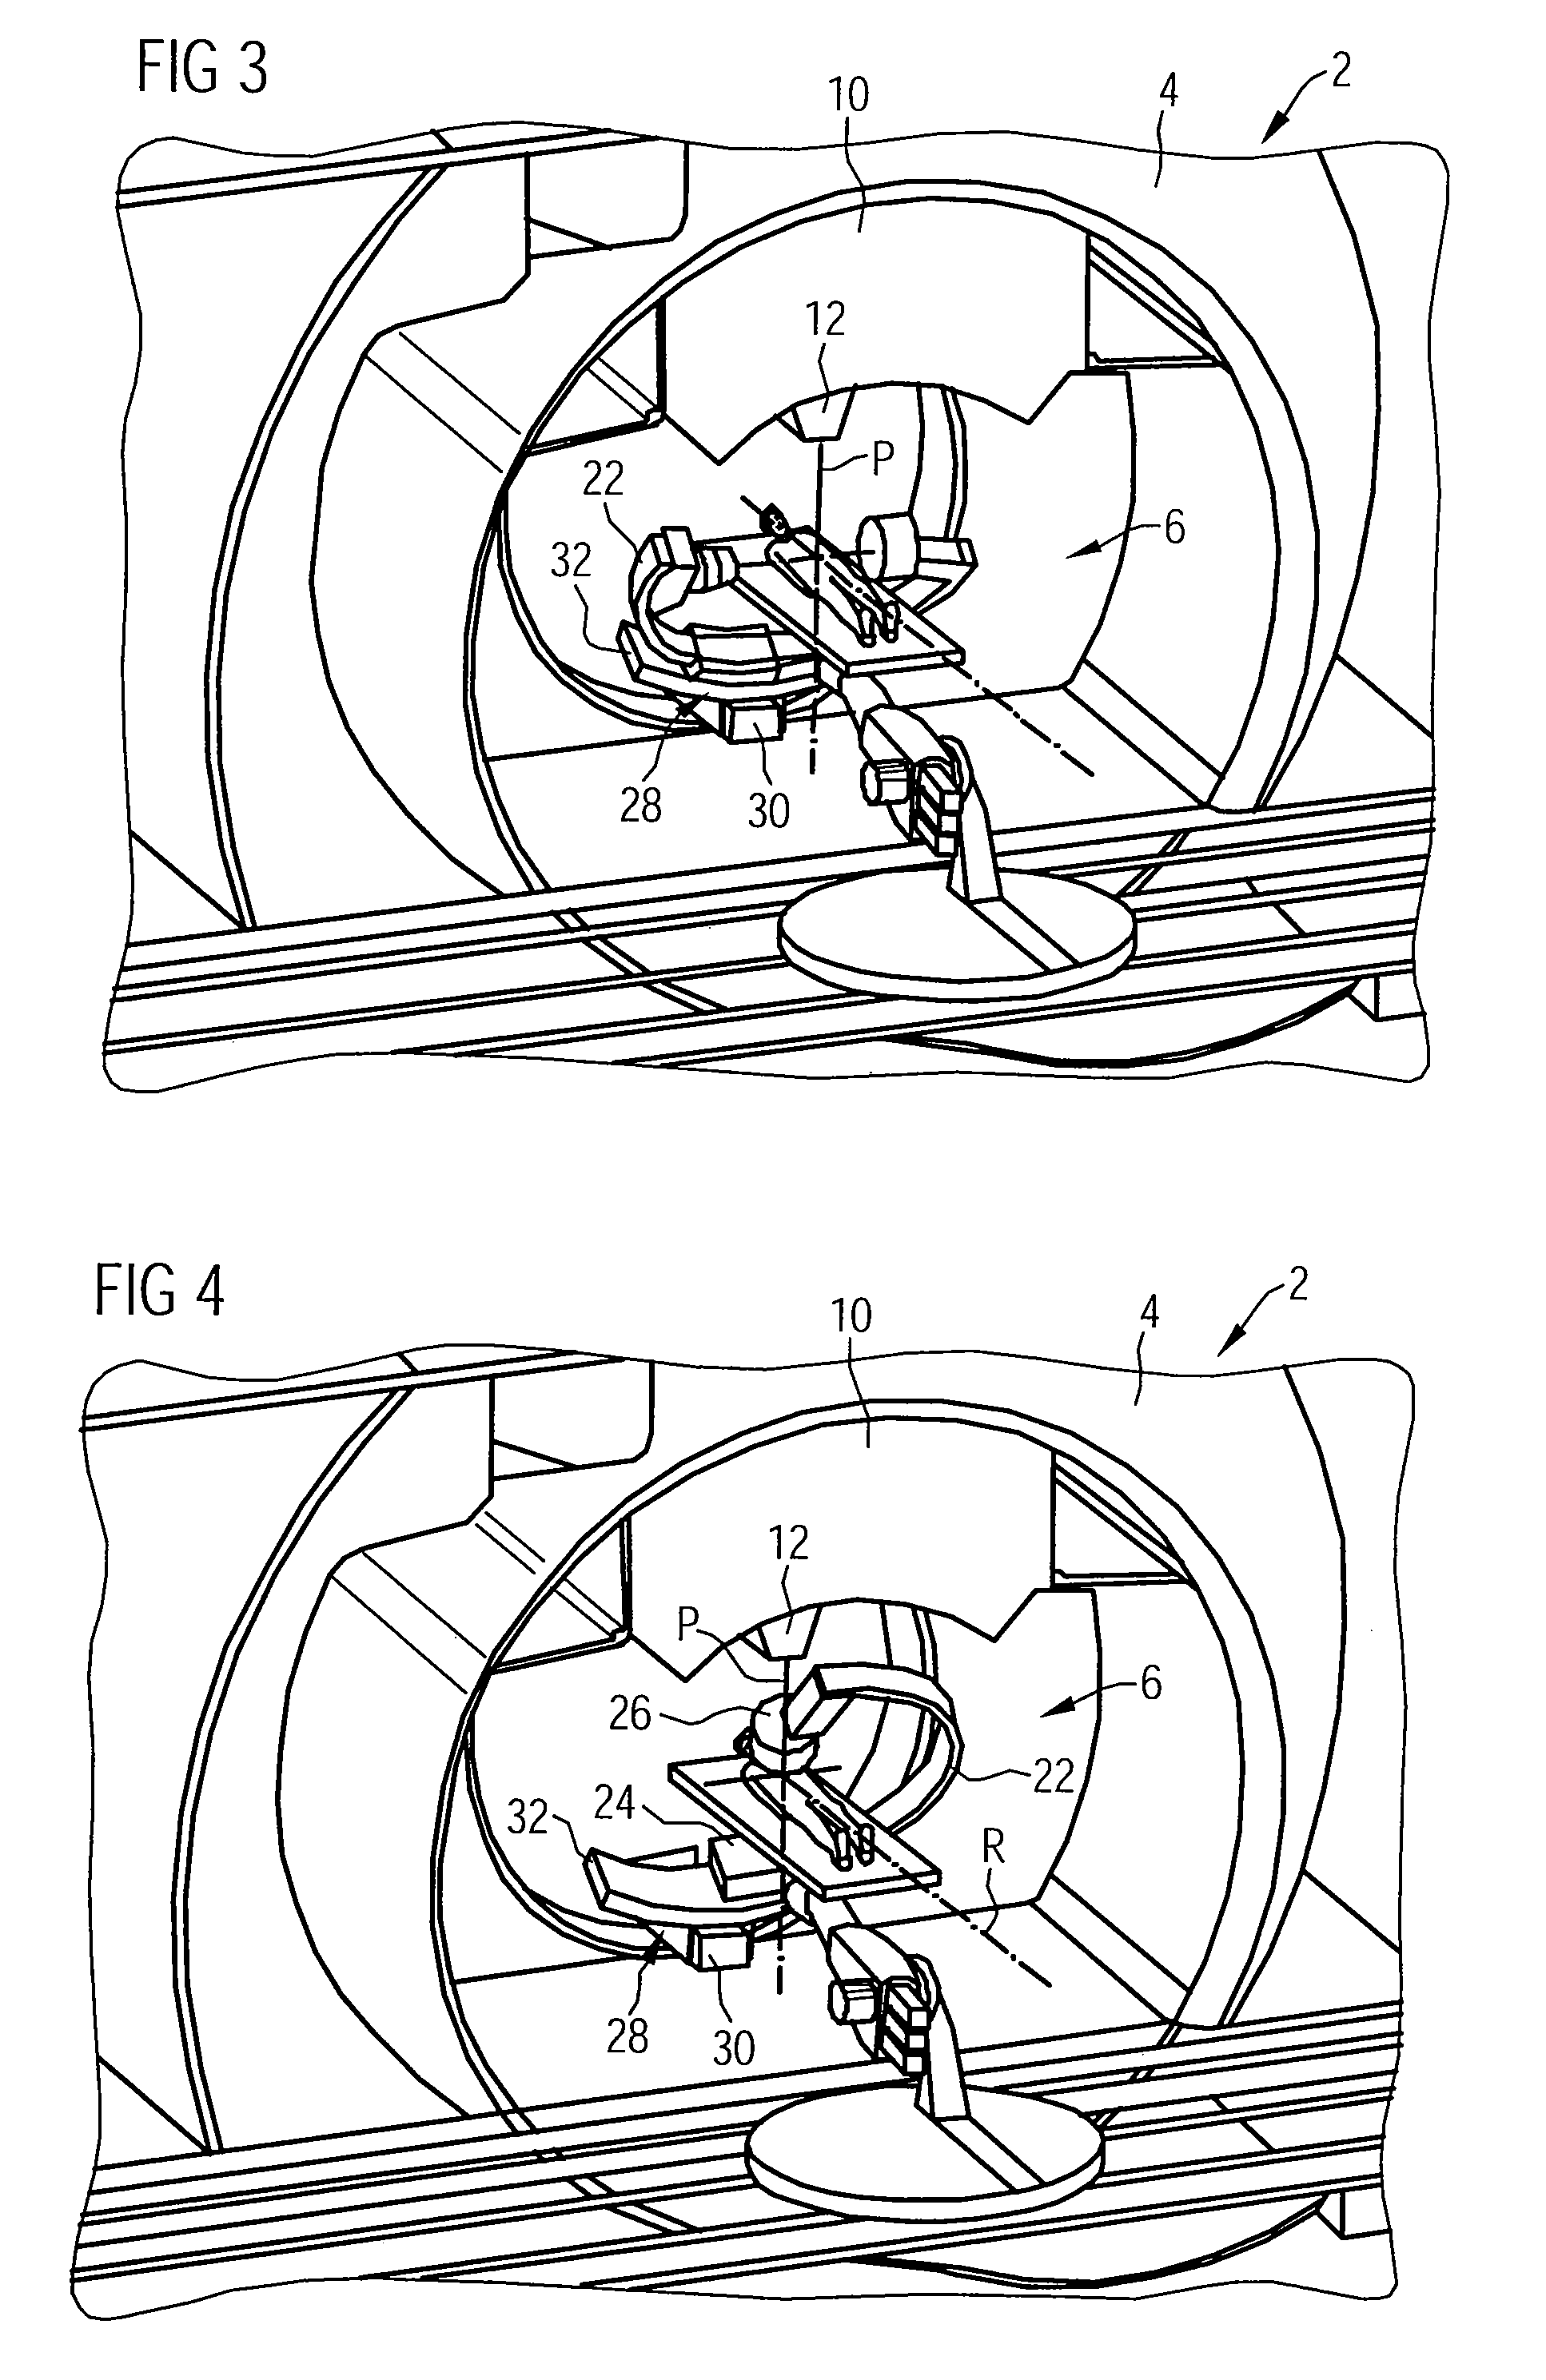 Particle therapy system